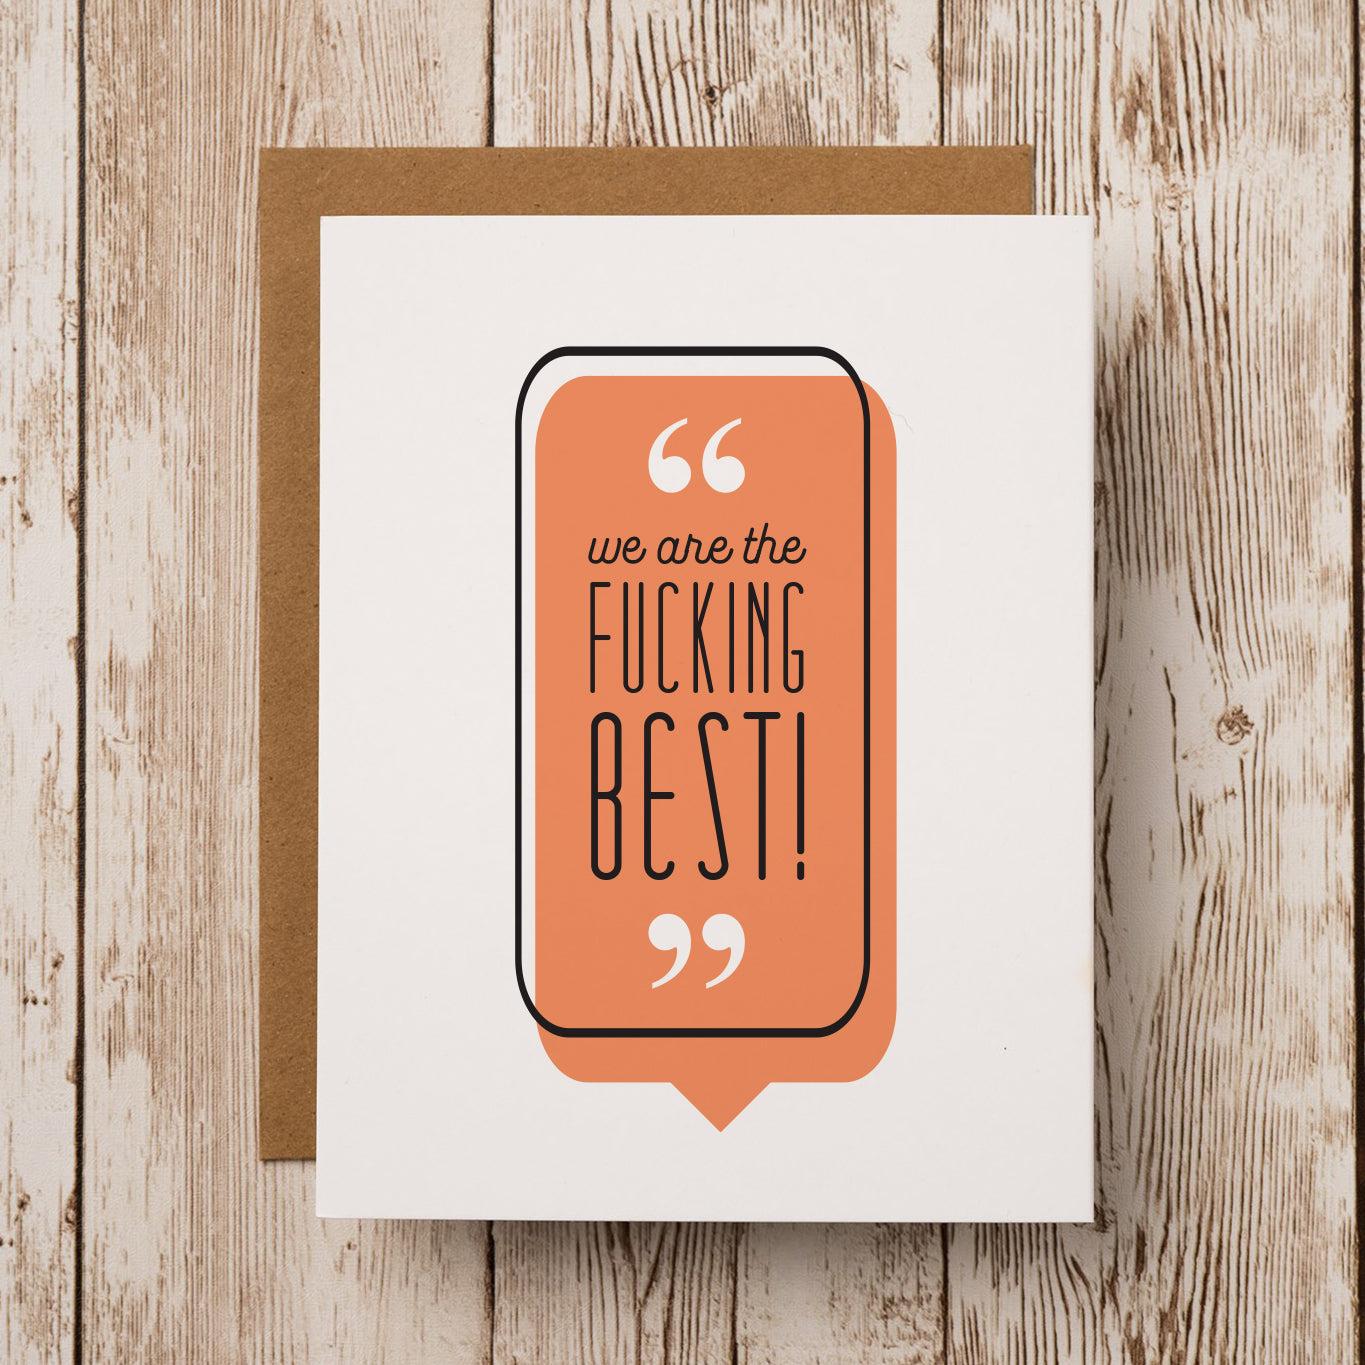 A funny unique greeting card for friends that reads "We are the fucking best!"